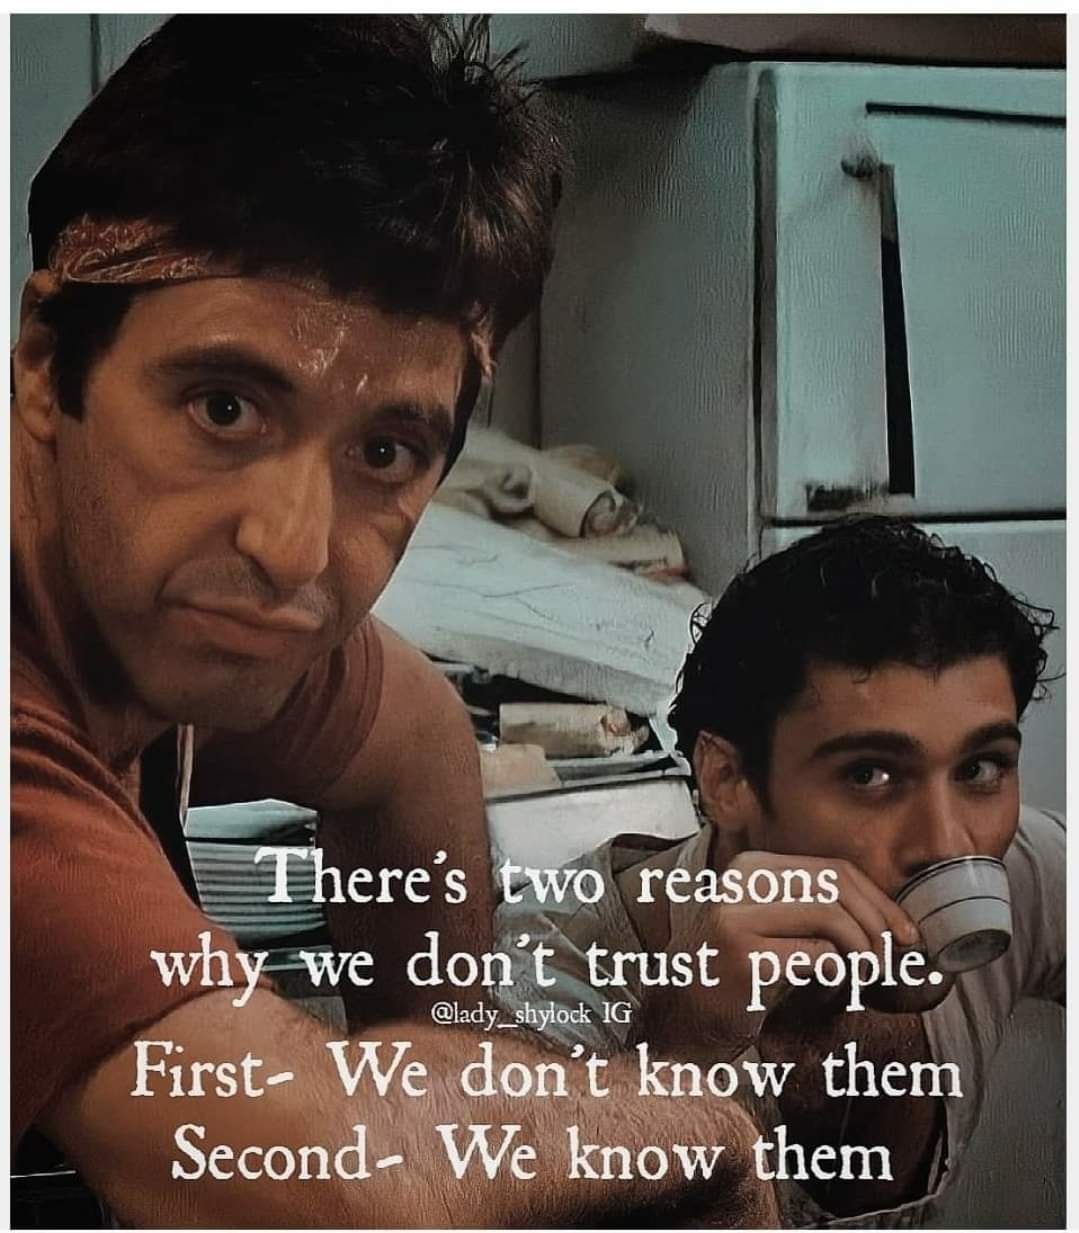 There are two reasons why we don’t trust people, First, we don’t know them. Second, we know them.